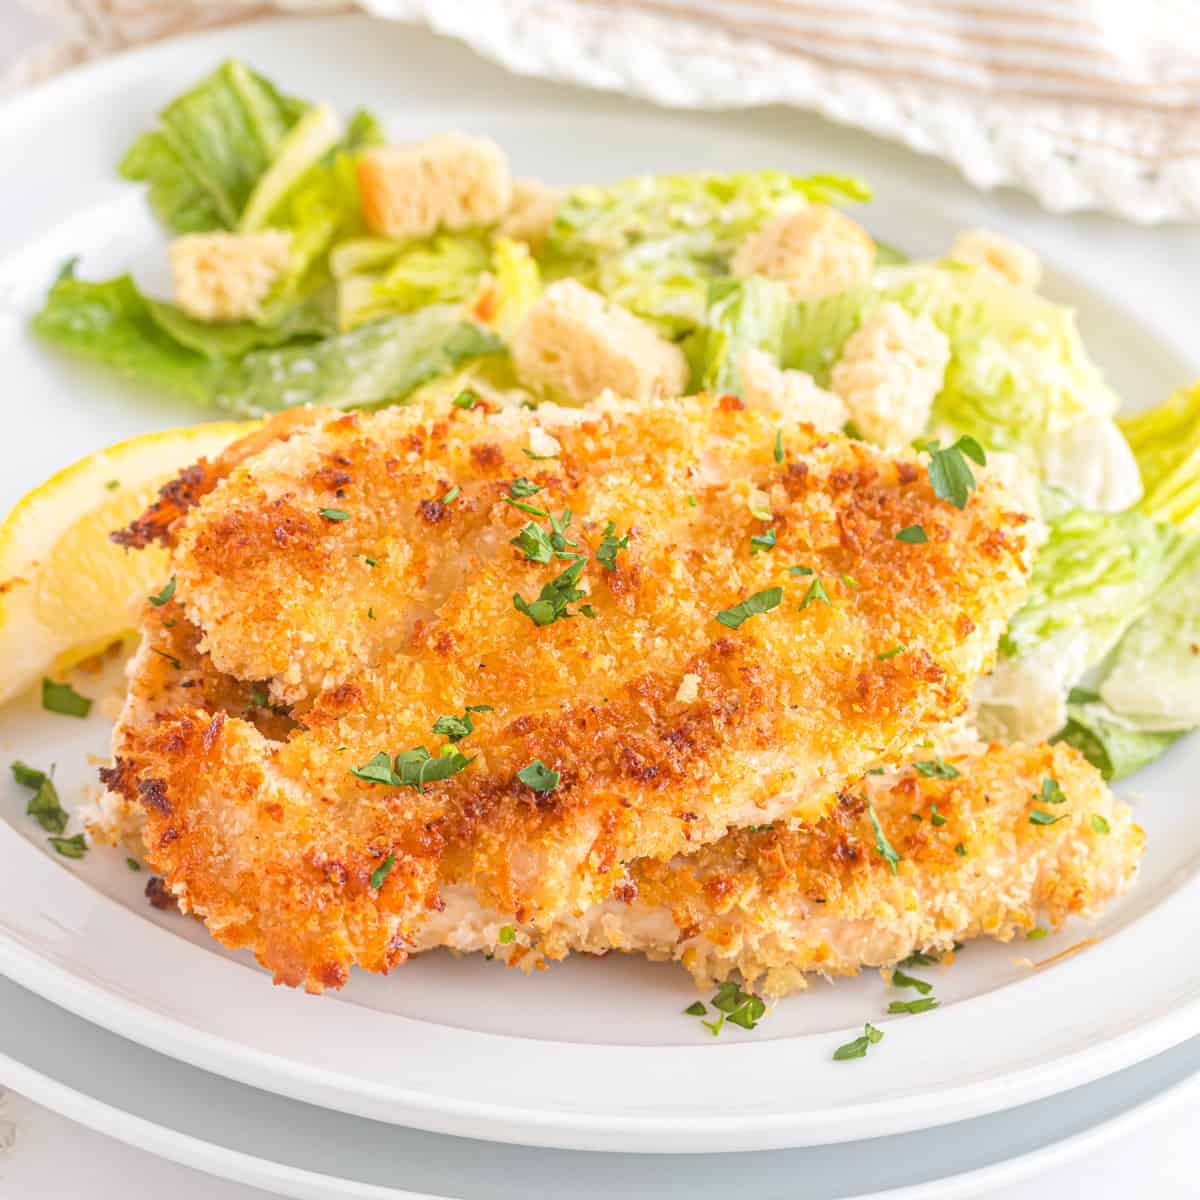 A plate of Panko chicken.